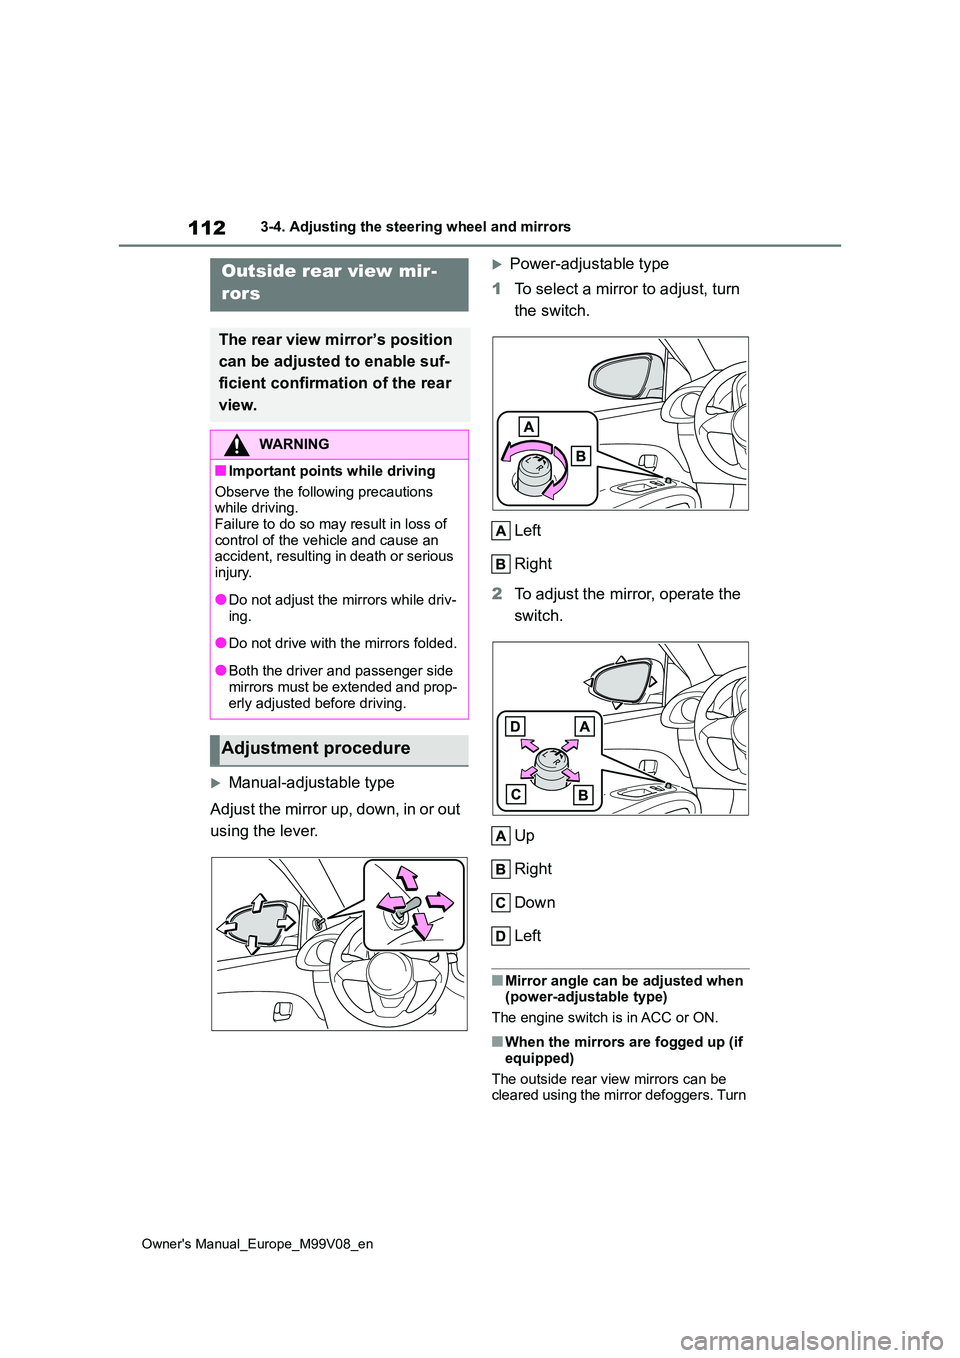 TOYOTA AYGO X 2022  Owners Manual (in English) 112
Owner's Manual_Europe_M99V08_en
3-4. Adjusting the steering wheel and mirrors
Manual-adjustable type 
A dju st  the  mi rr or  u p, d own,  in  or  ou t  
using the lever.
Power-adjustab